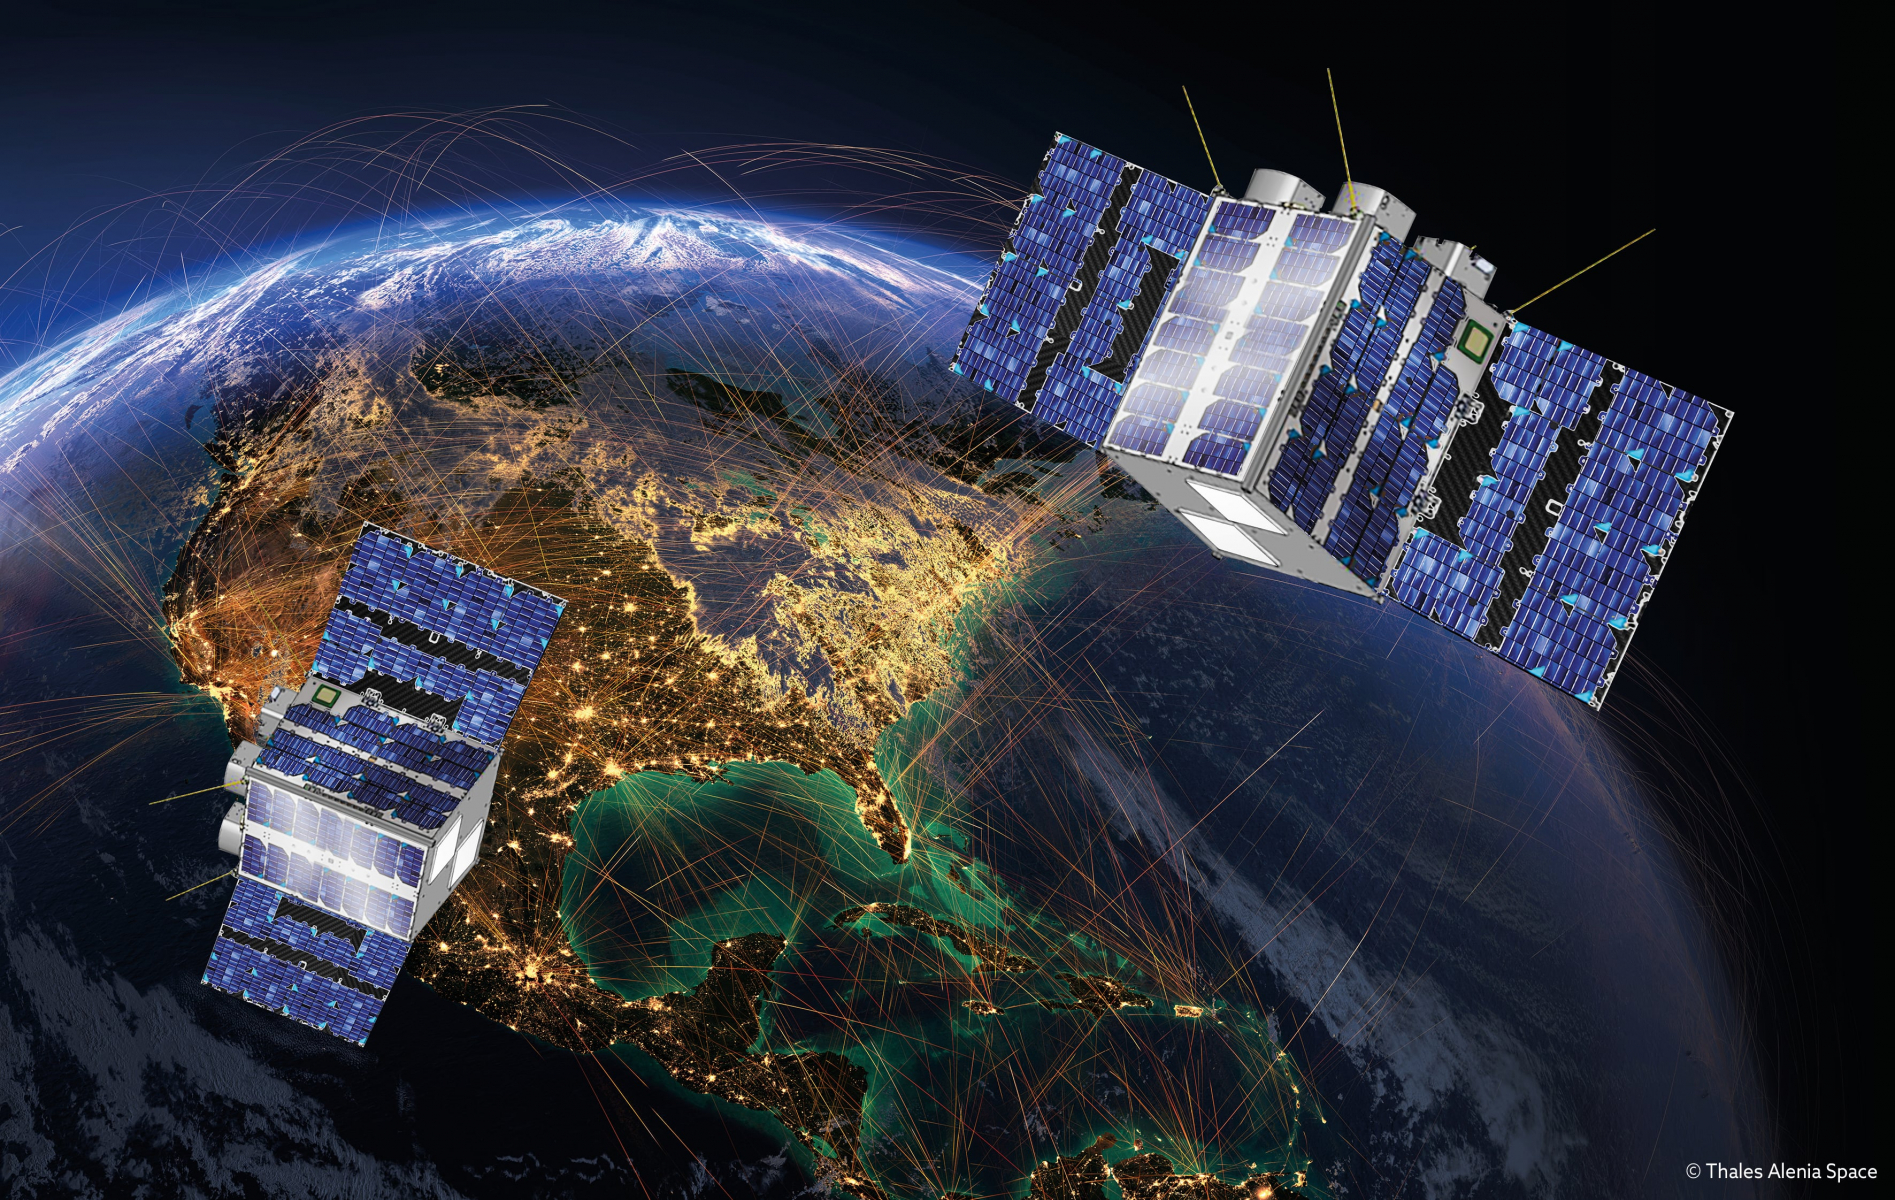 Omnispace selected Thales Alenia Space to design and build an initial set of two satellites as part of of its satellite-based Internet of Things (IoT) infrastructure. These will include customised antennas from Anywaves. 